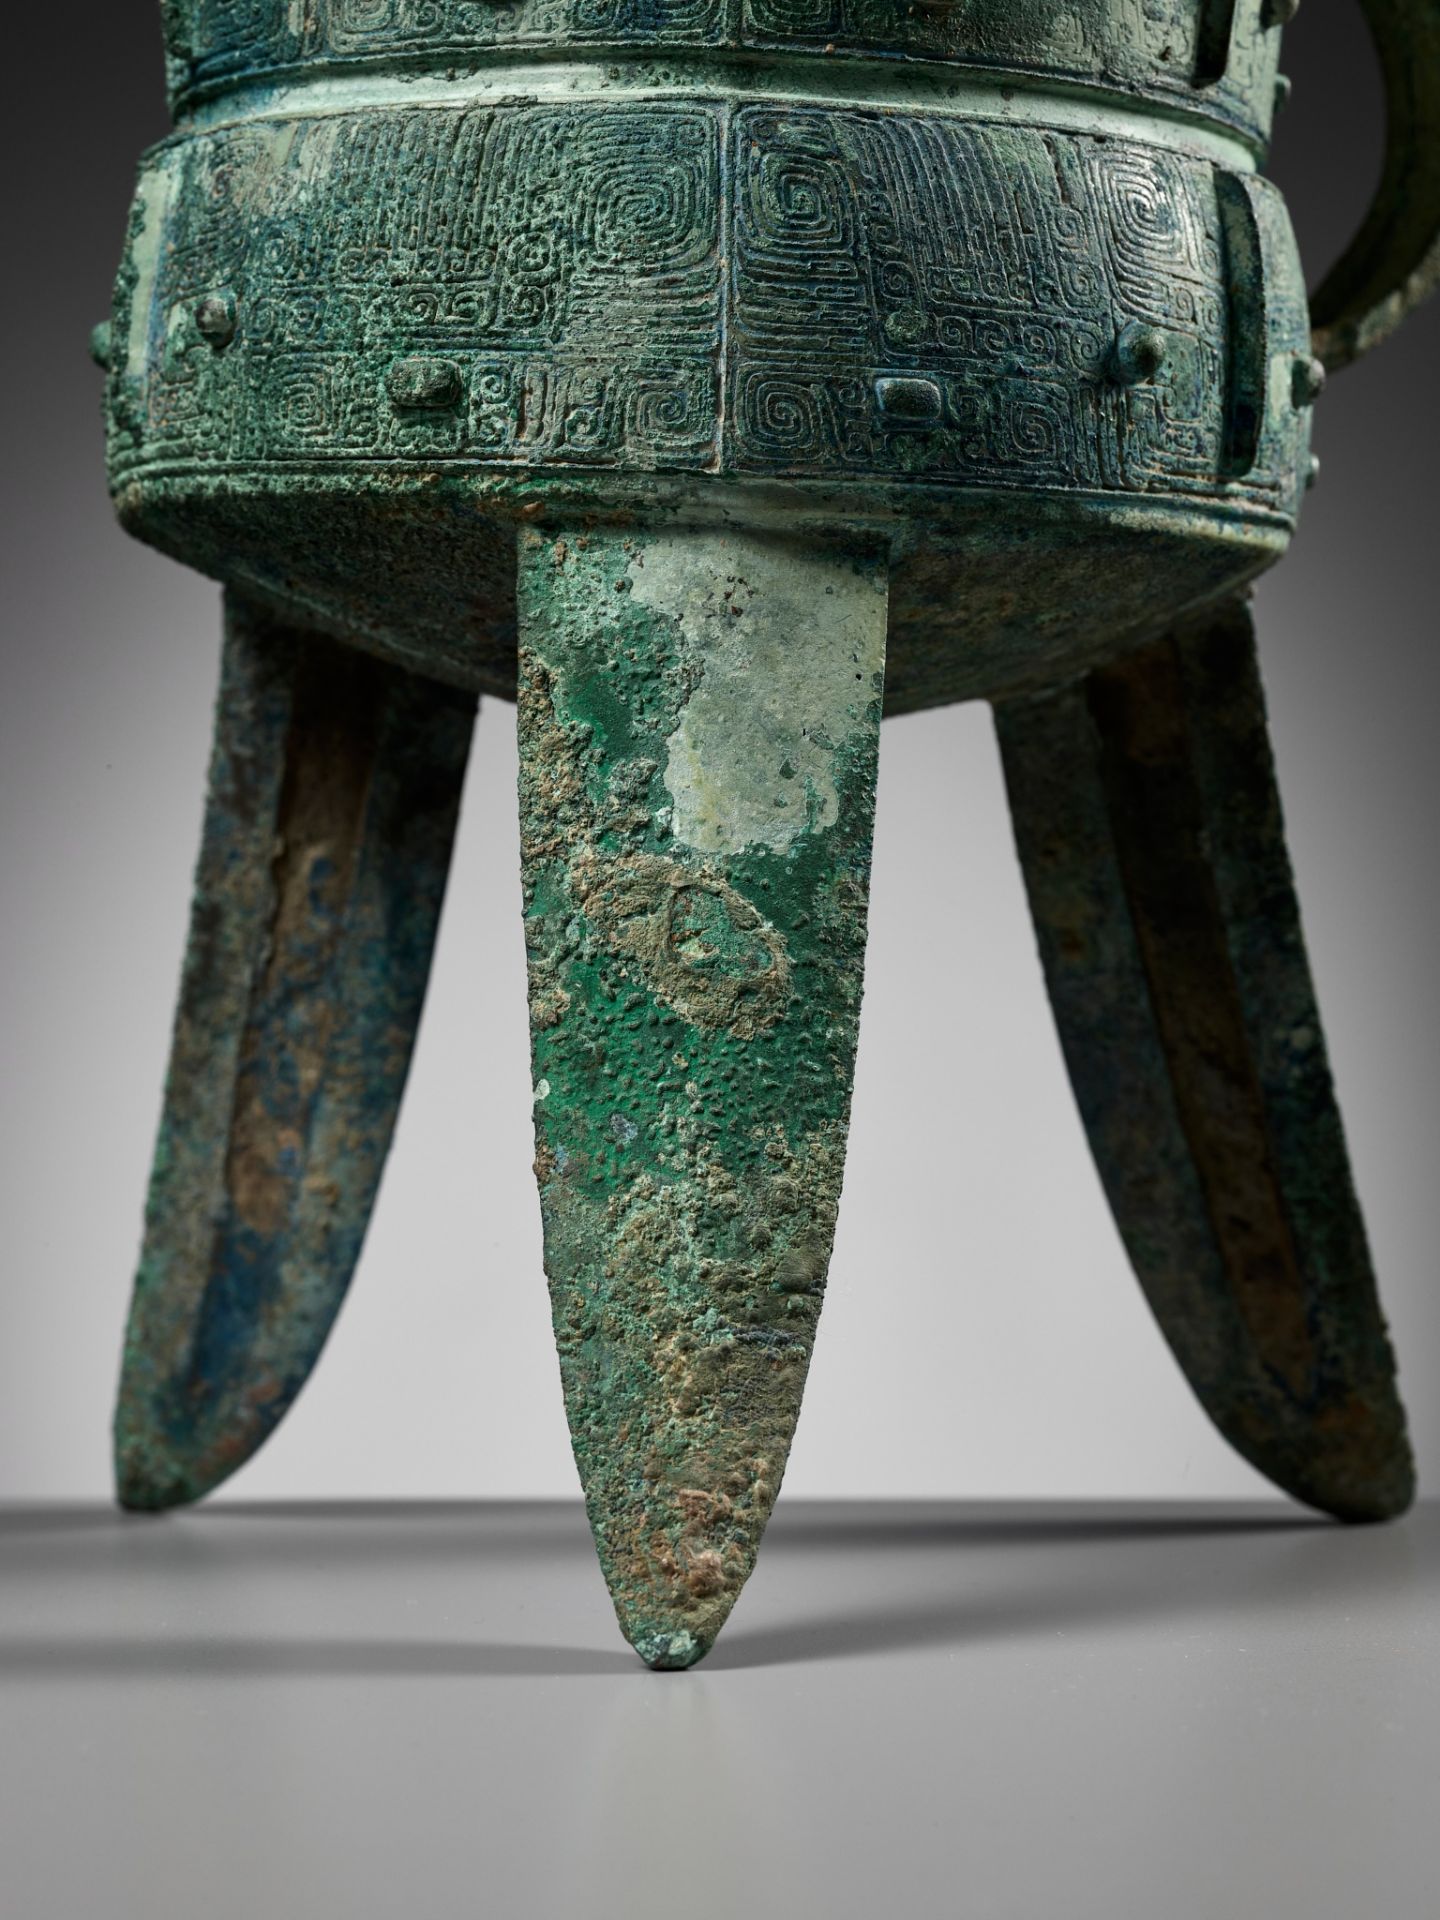 AN EXCEPTIONALLY LARGE AND MASSIVE BRONZE RITUAL TRIPOD WINE VESSEL, JIA, WITH A CLAN MARK, SHANG - Image 23 of 29